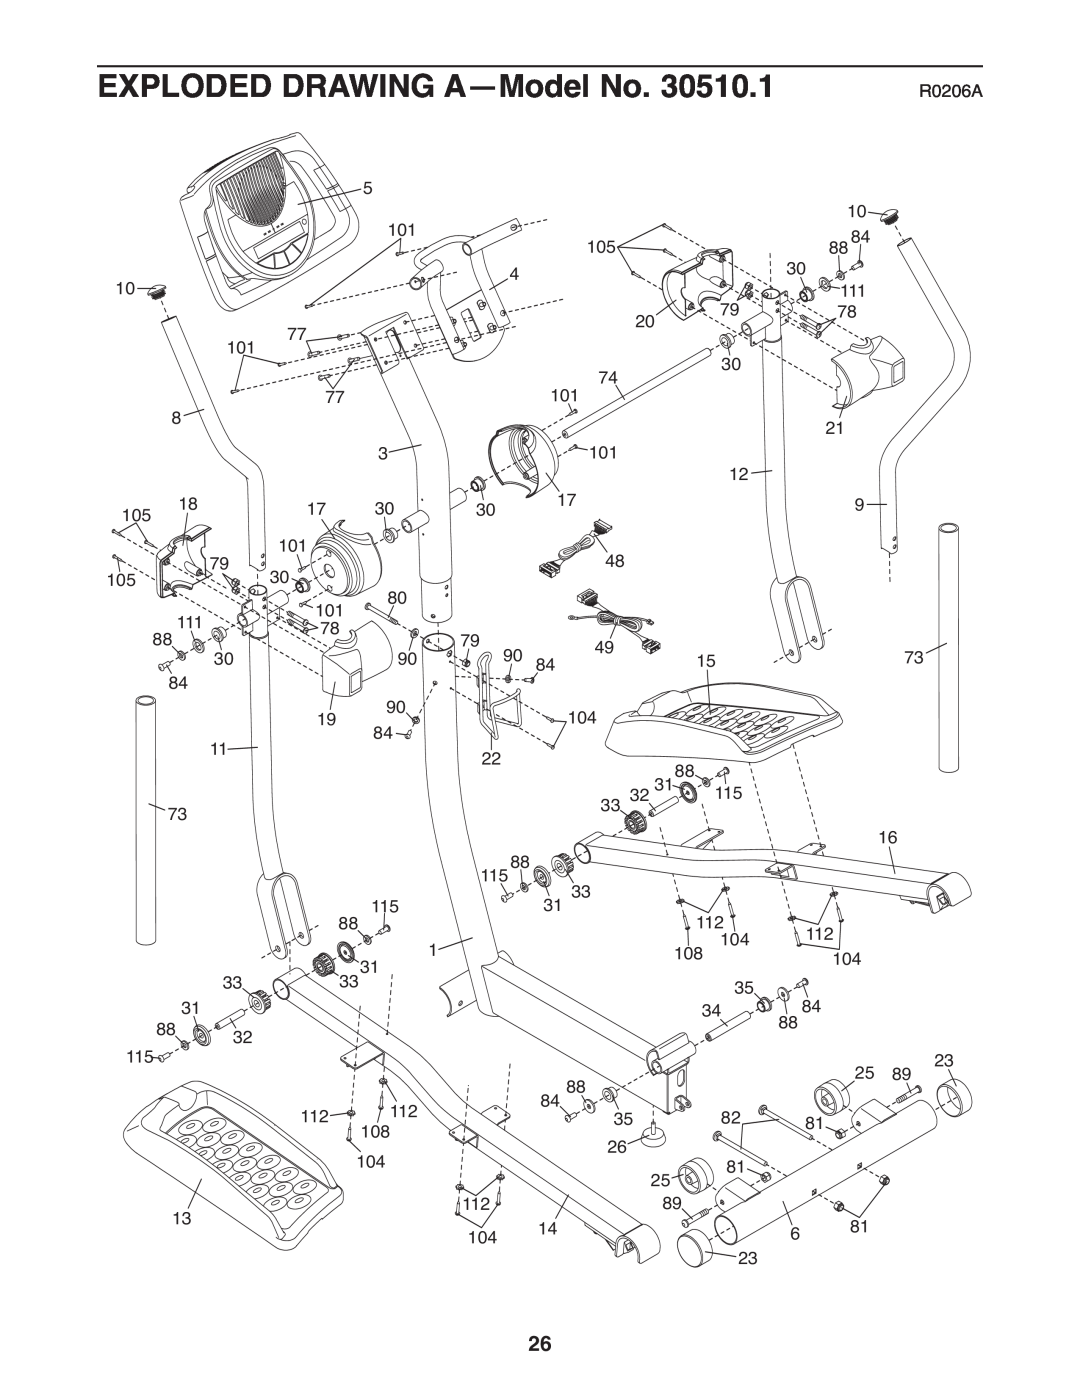 NordicTrack 30510.1 user manual EXPLODED DRAWING A-Model No, R0206A 